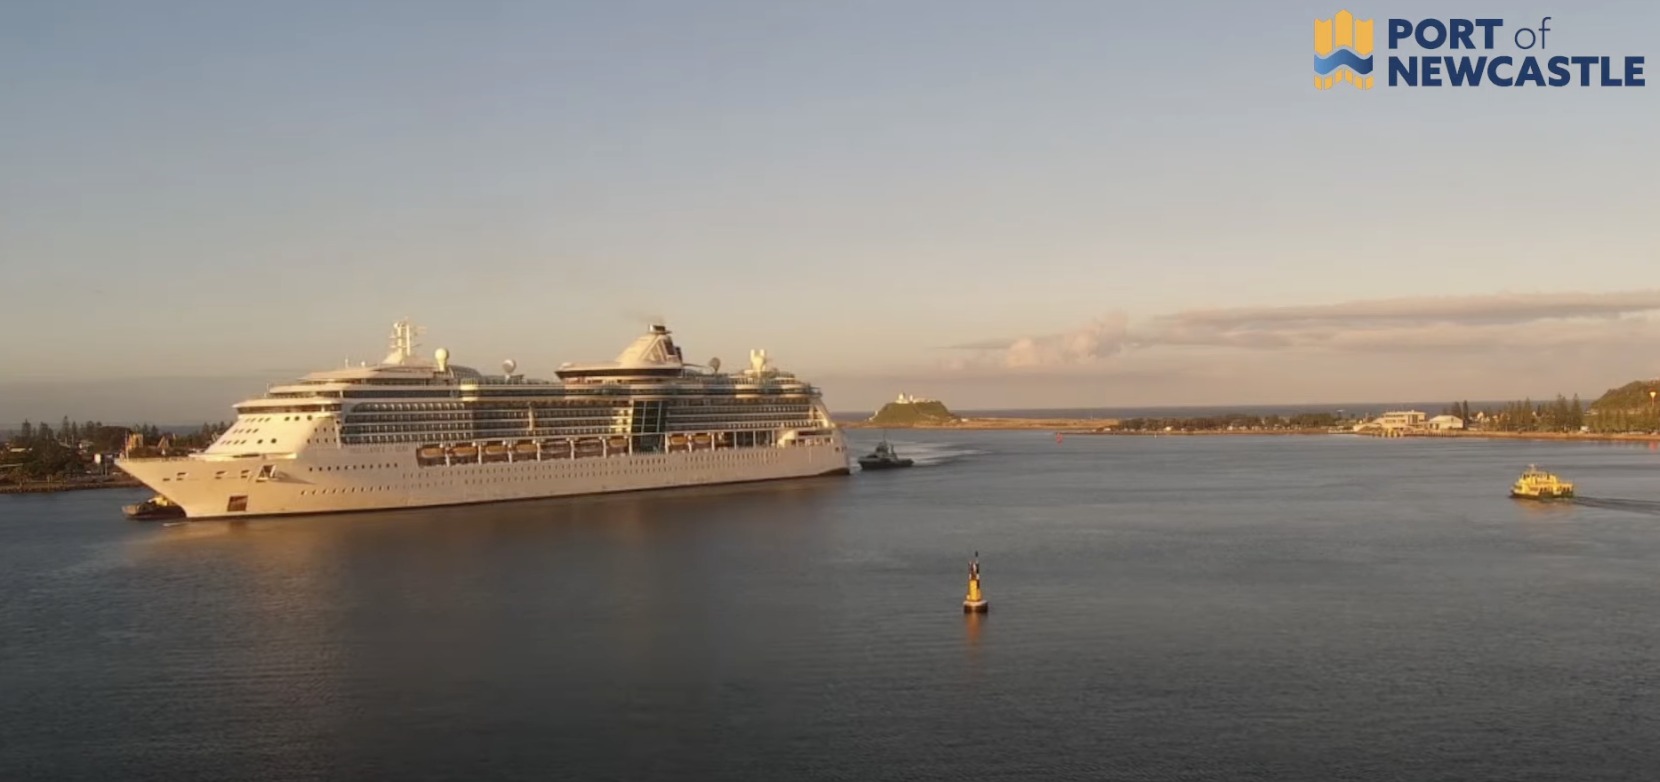 Brilliance of the Seas pulling into Newcastle for repairs spark compensation debate among guests and cruise lines.